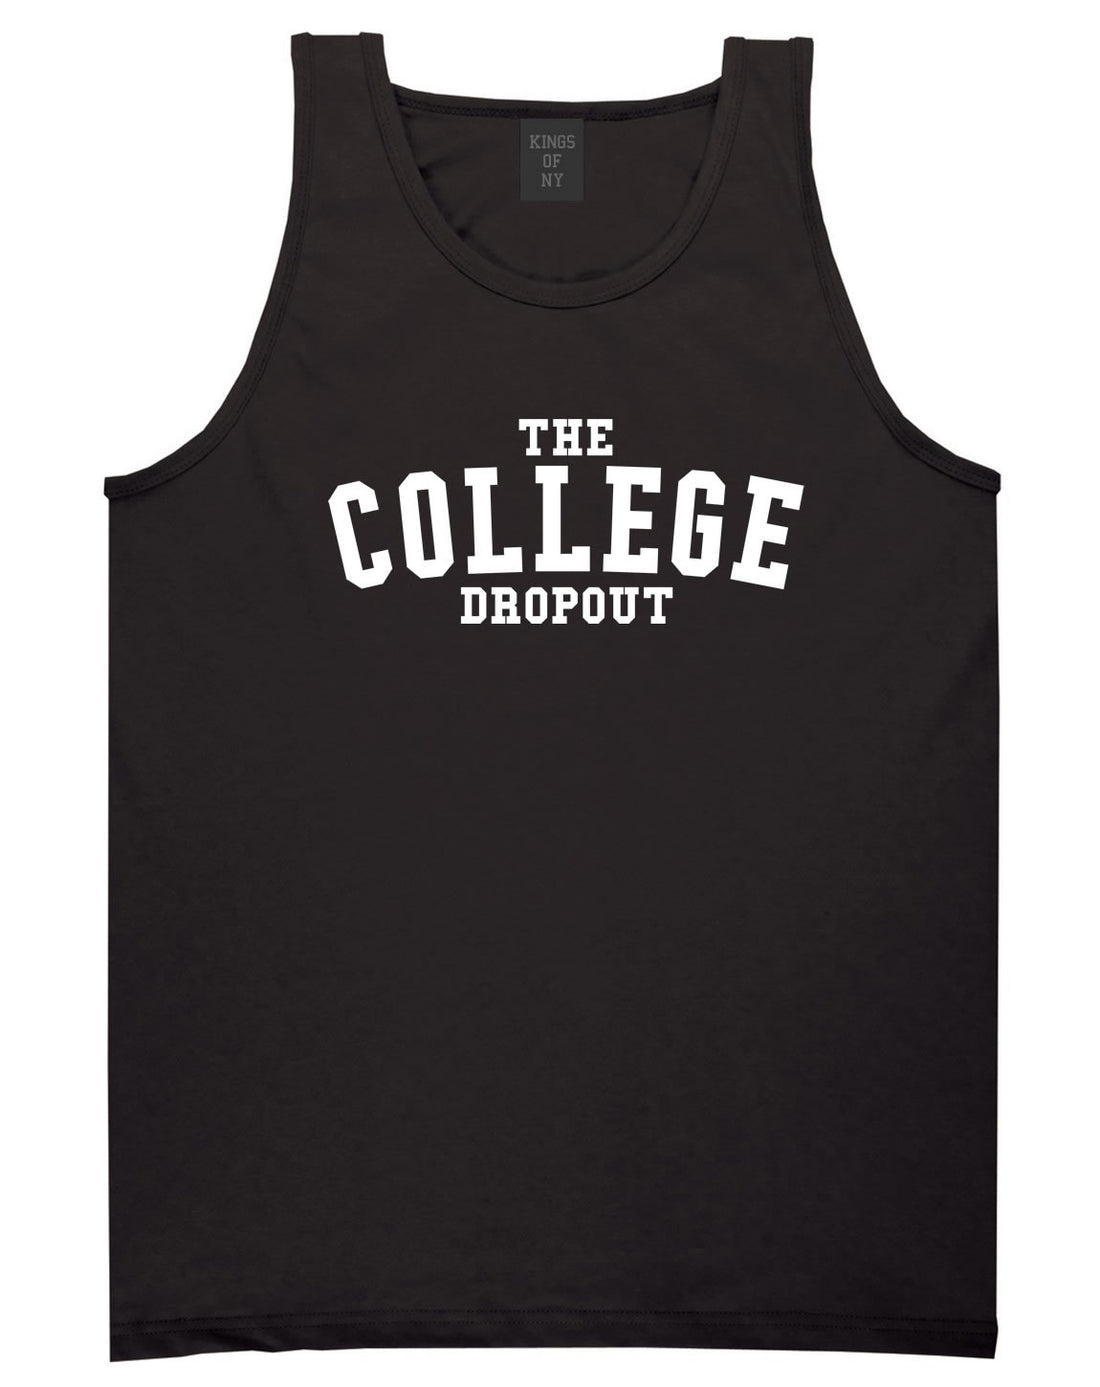 The College Dropout Album High School Tank Top in Black By Kings Of NY